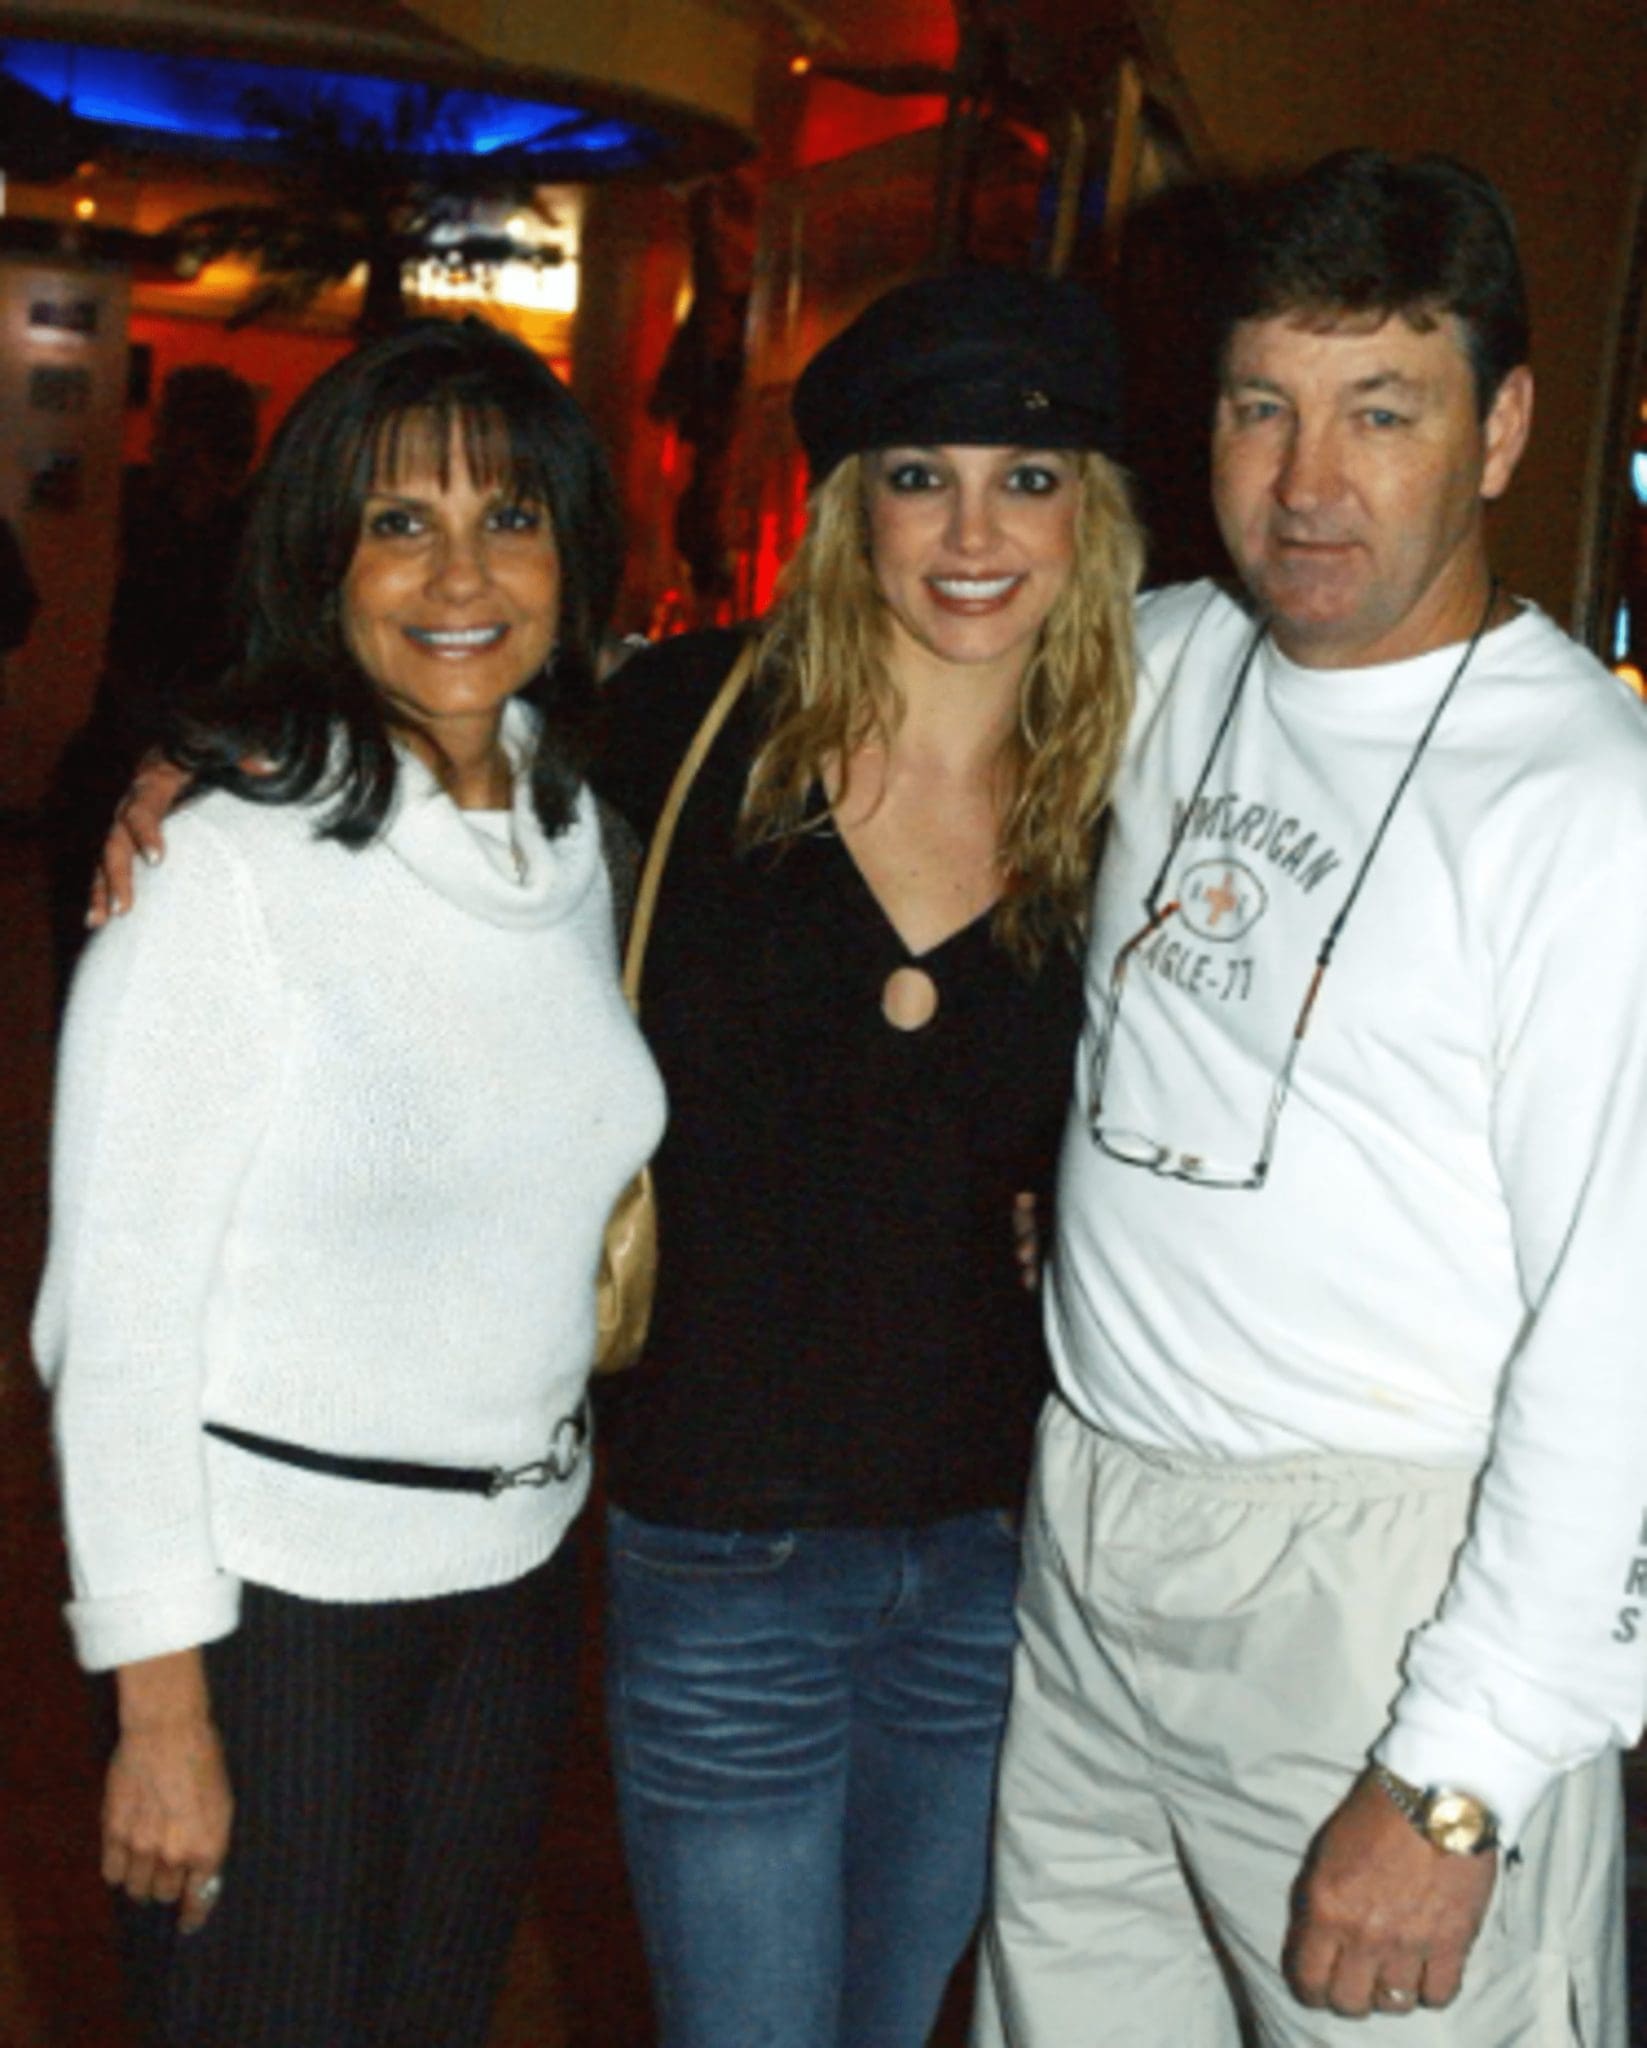 Britney Spears criticized her father, Jamie Spears, for keeping her "like an f-king dog."